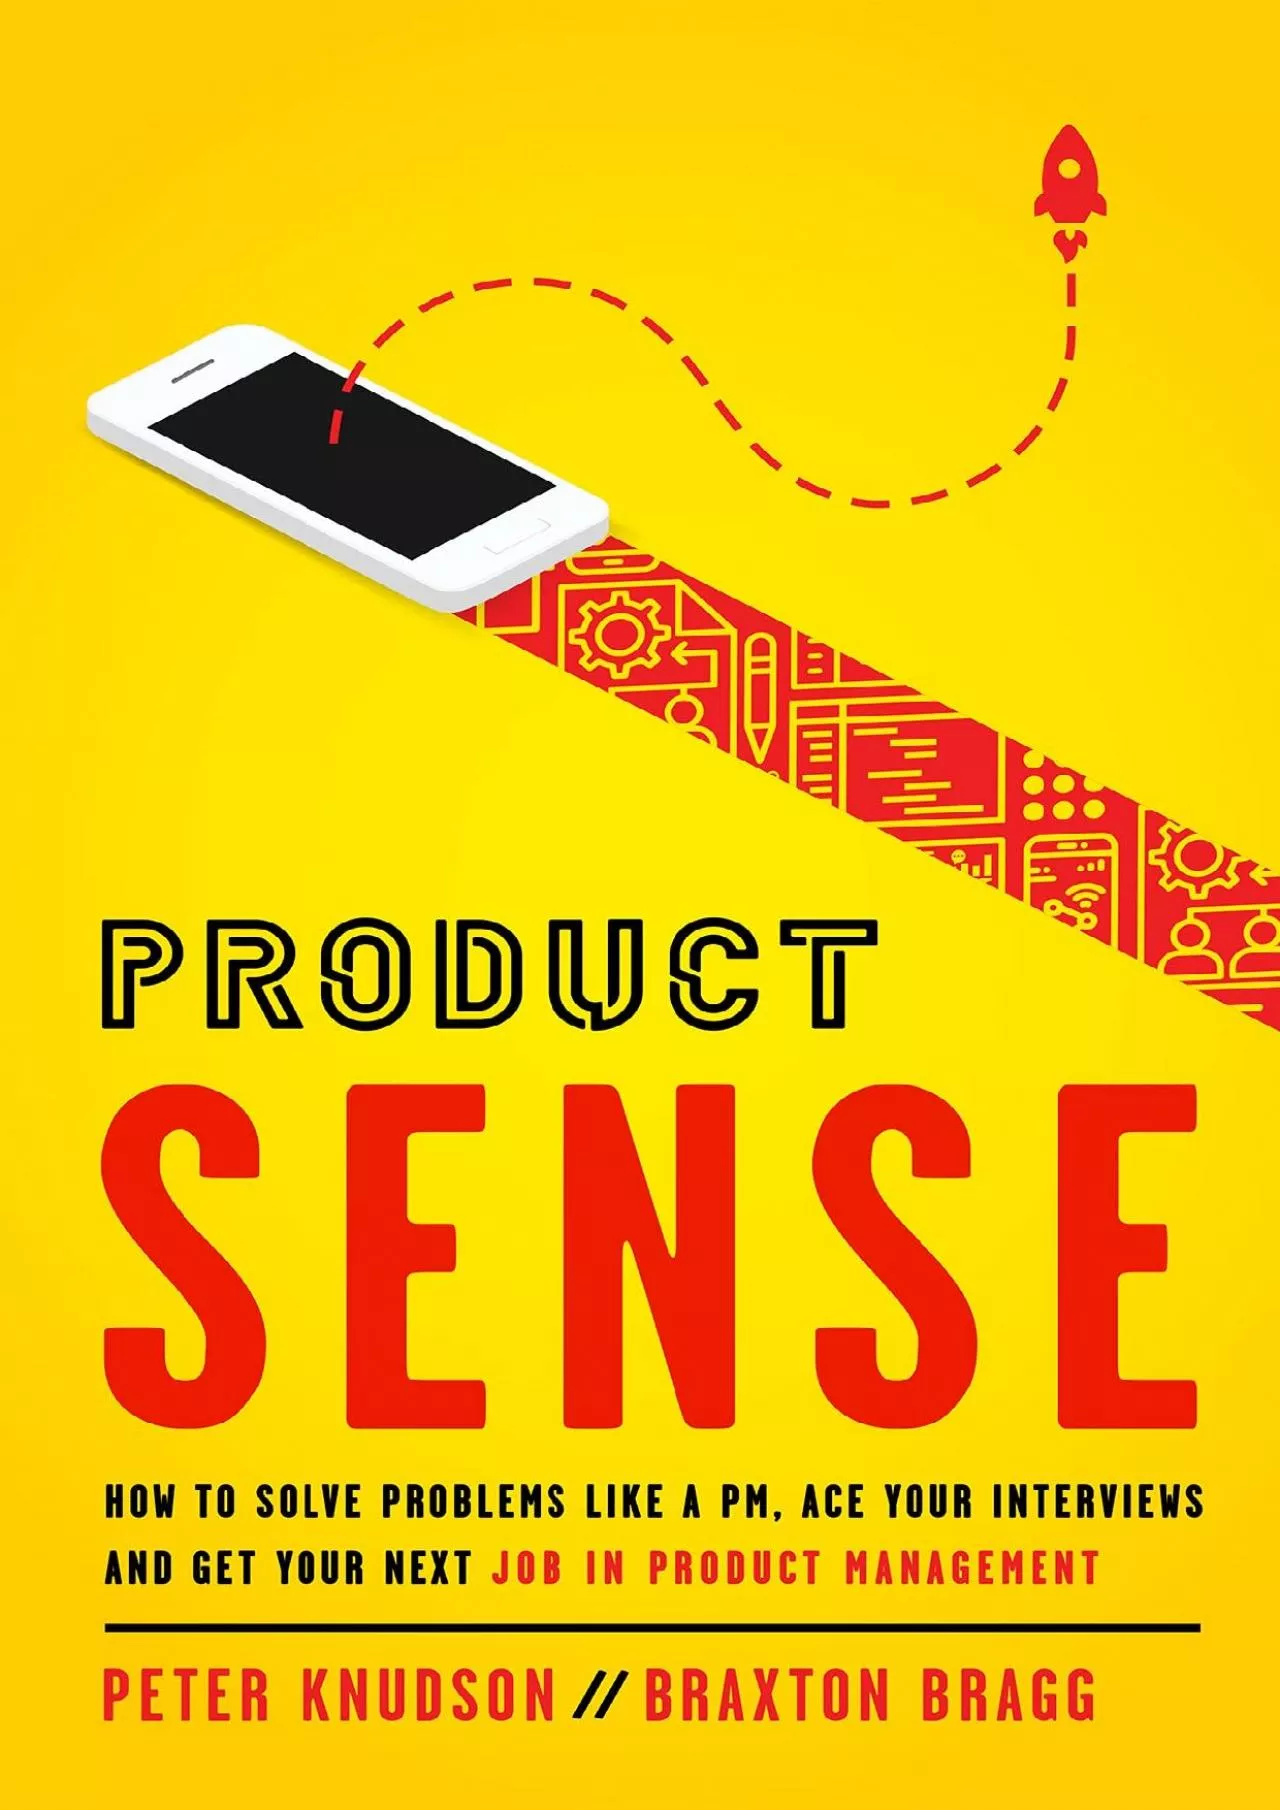 (BOOK)-Product Sense: How to Solve Problems Like a PM, Ace Your Interviews, and Get Your